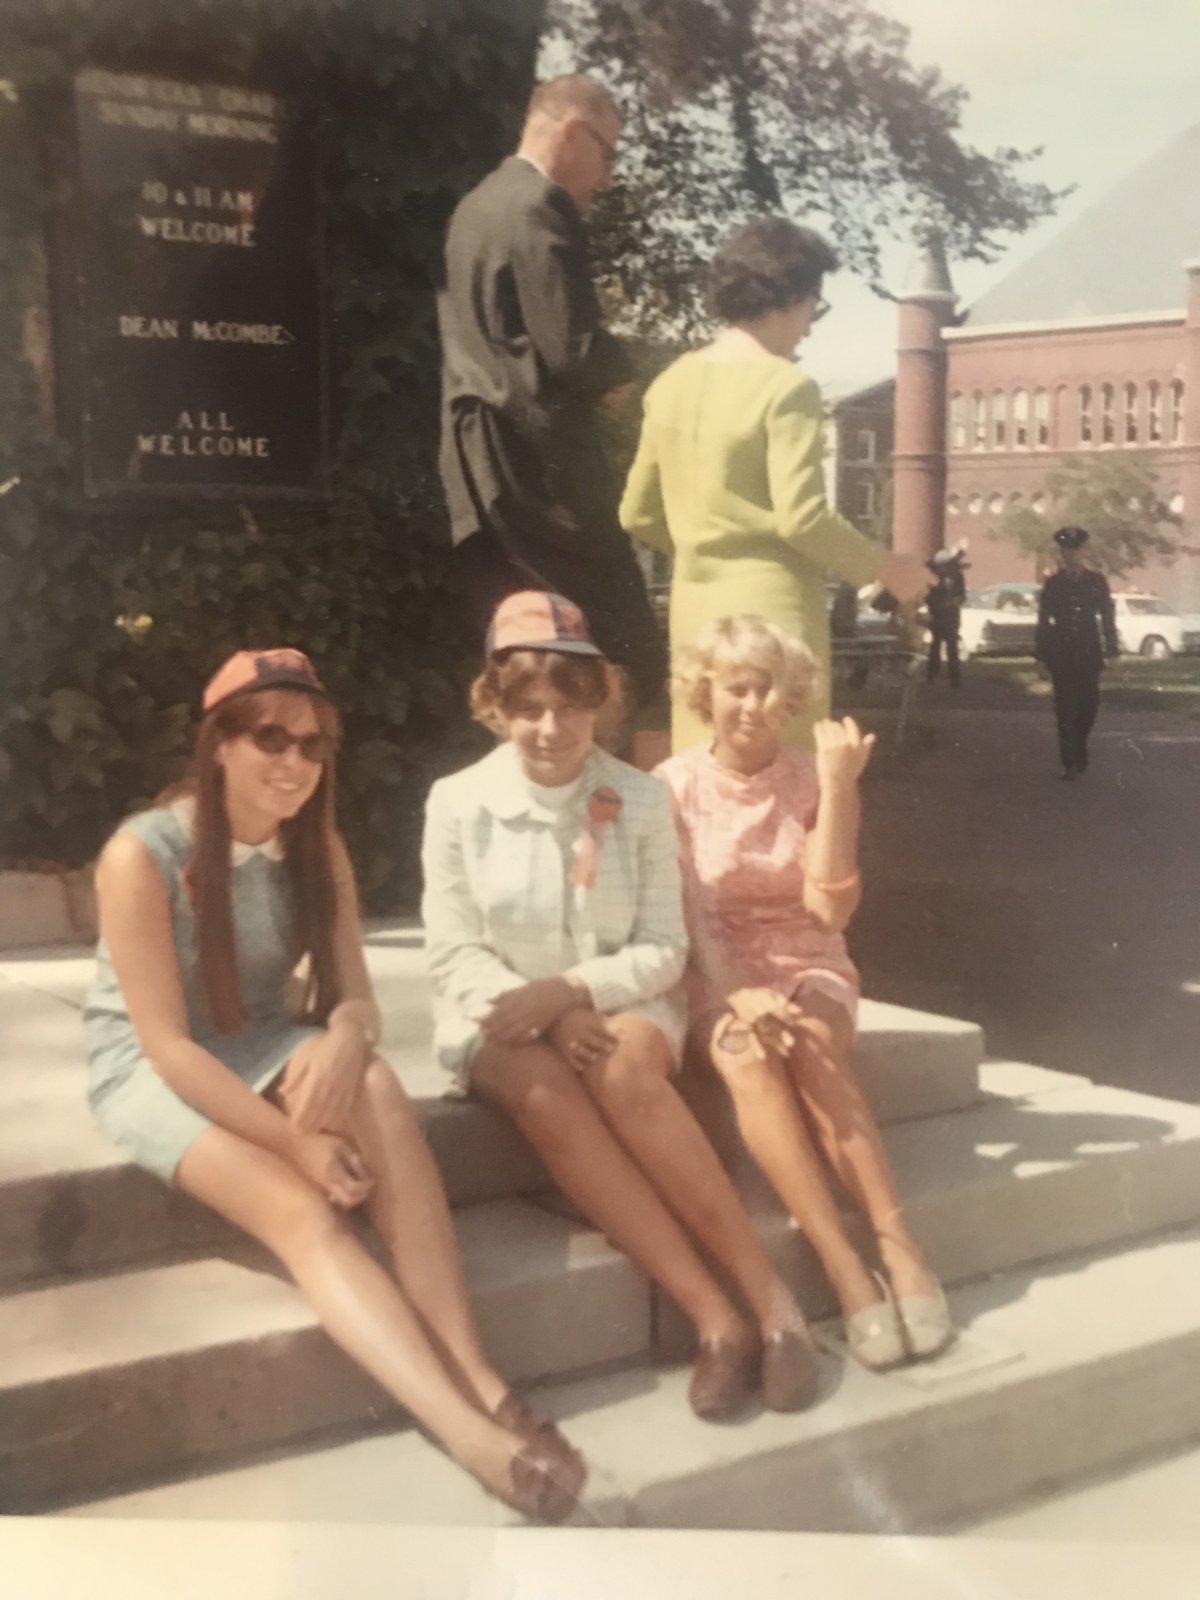 Photo from 1968 on the Syracuse University campus. Three girls sitting on steps outside.